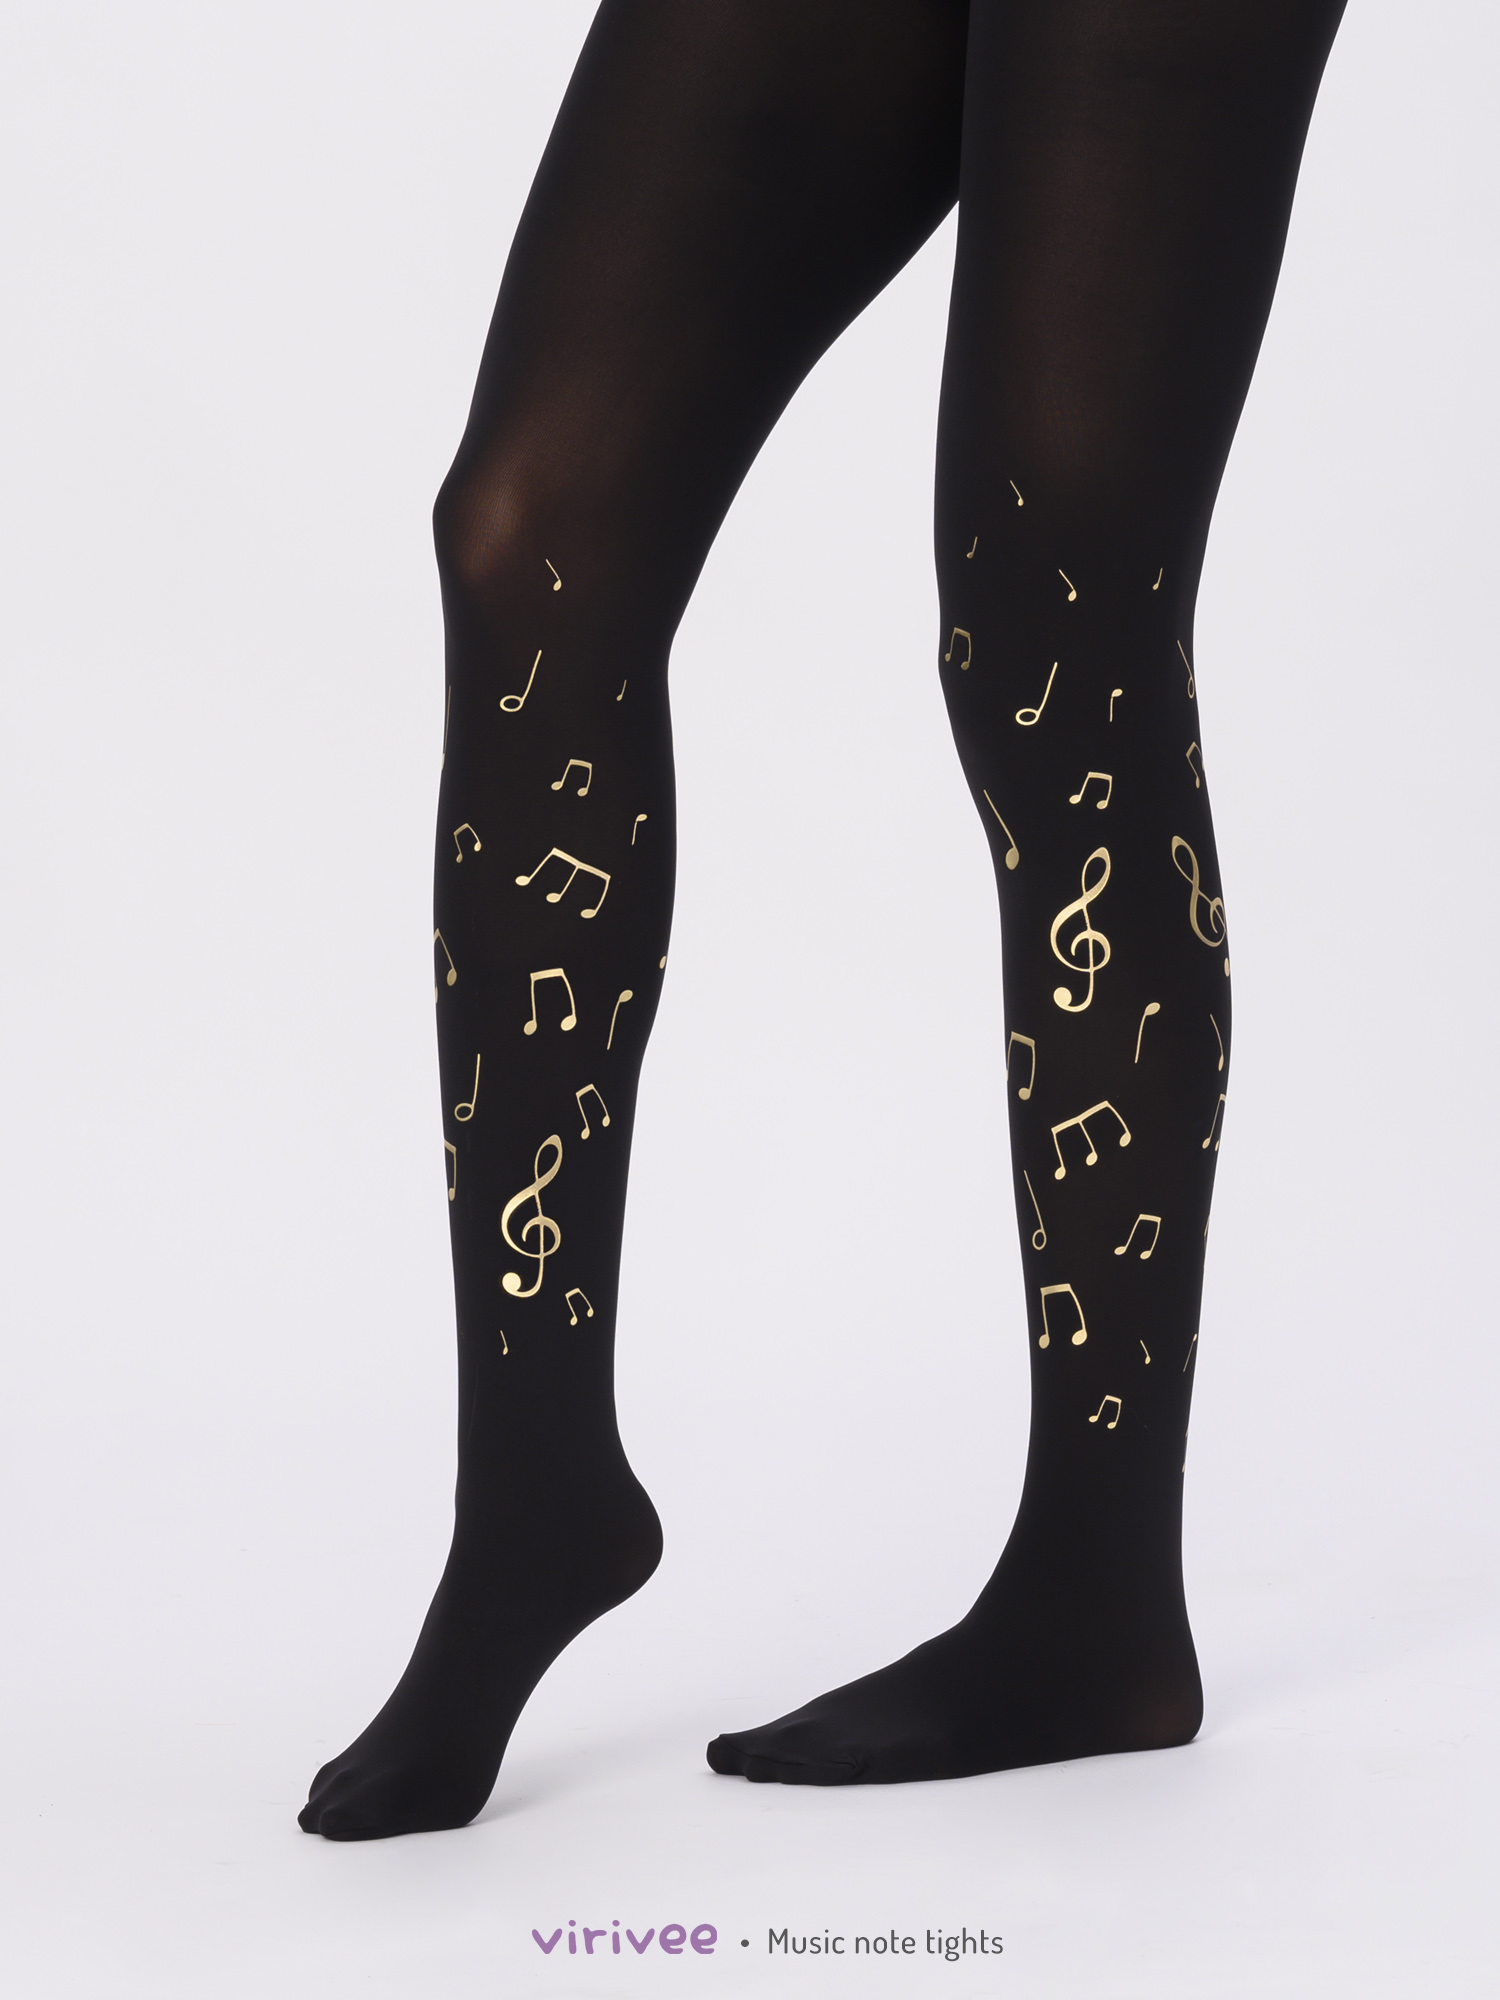 Golden music note tights by Virivee